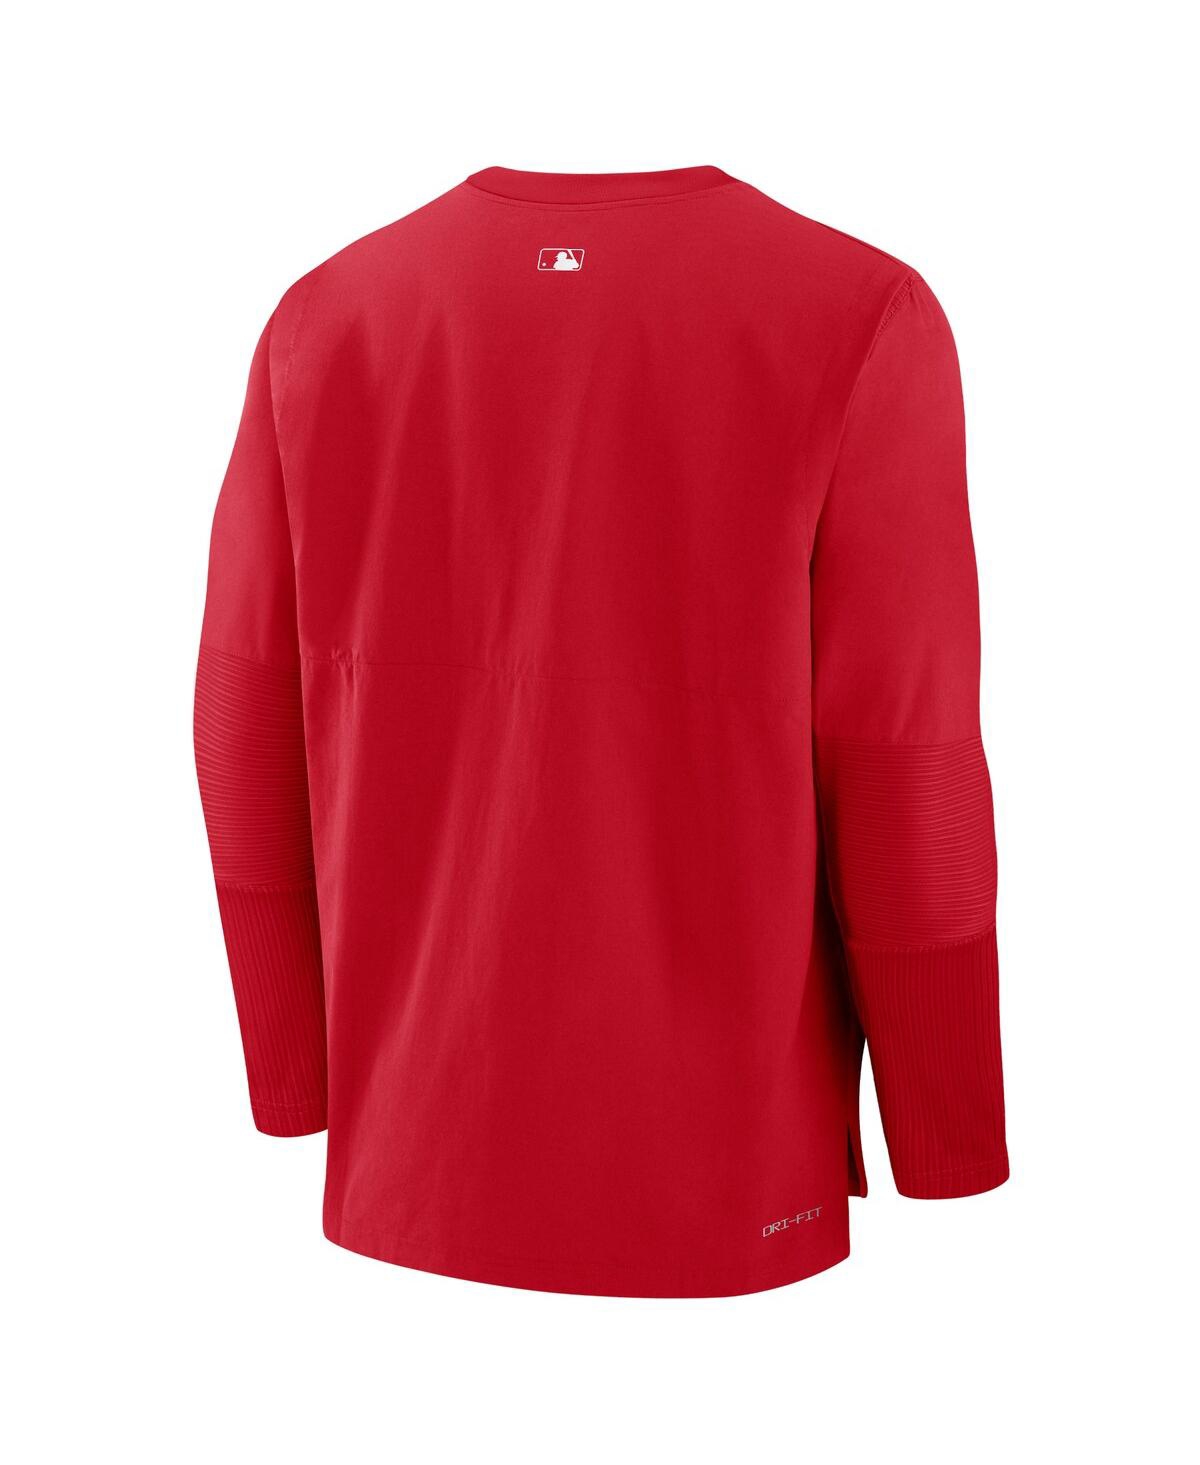 Shop Nike Men's  Red Boston Red Sox Authentic Collection Player Performance Pullover Sweatshirt